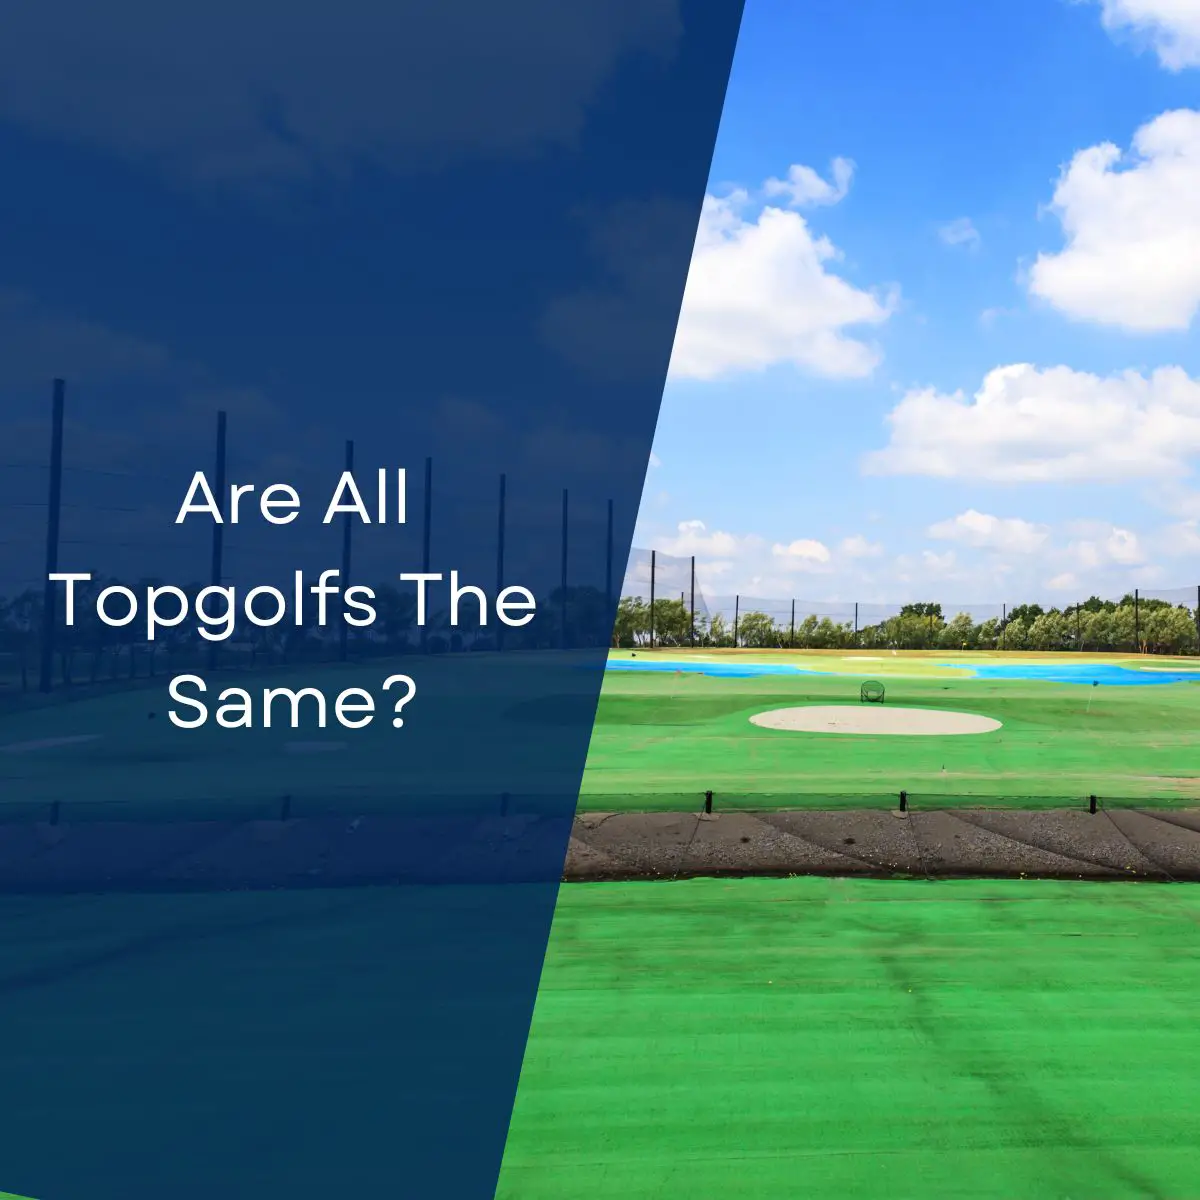 Are All Topgolfs The Same?